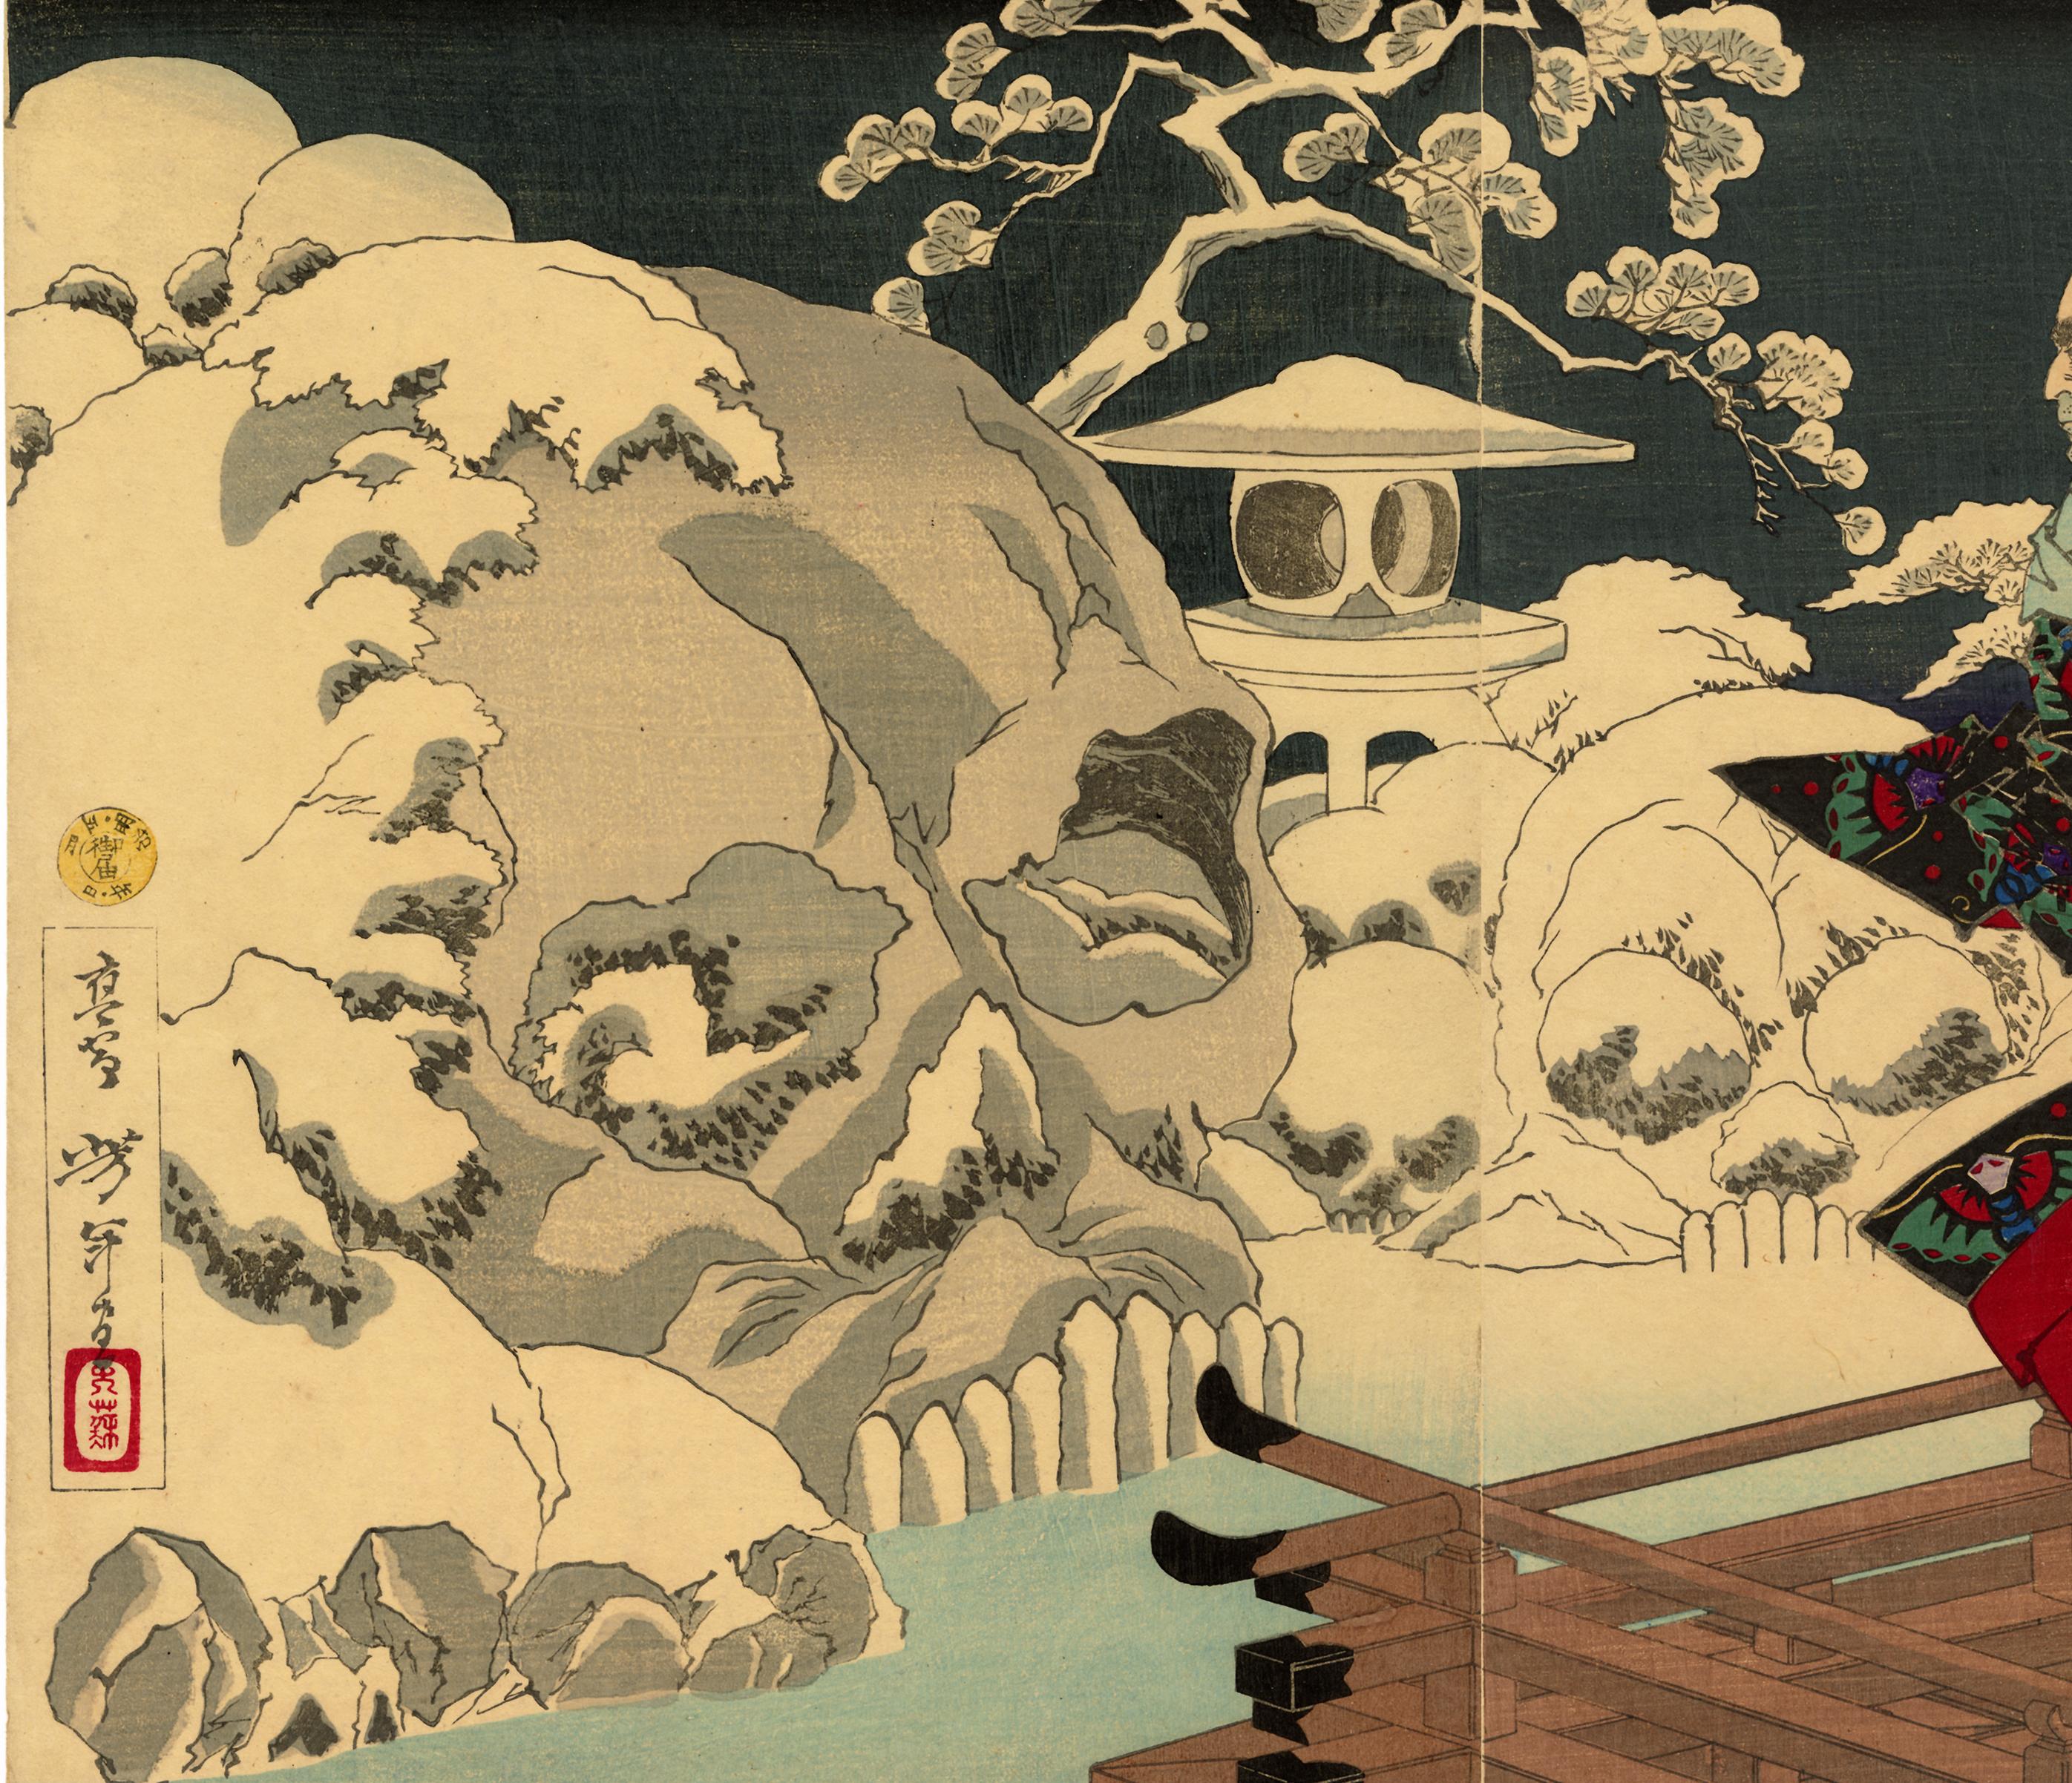 Here the ruthless Taira no Kiyomori sees the skulls of the enemies that he had had killed staring at him in a snowy garden at his palace in Fukuhara. Even the stone lantern bears empty eye sockets that stare at him with reproach. Yoshitoshi designed